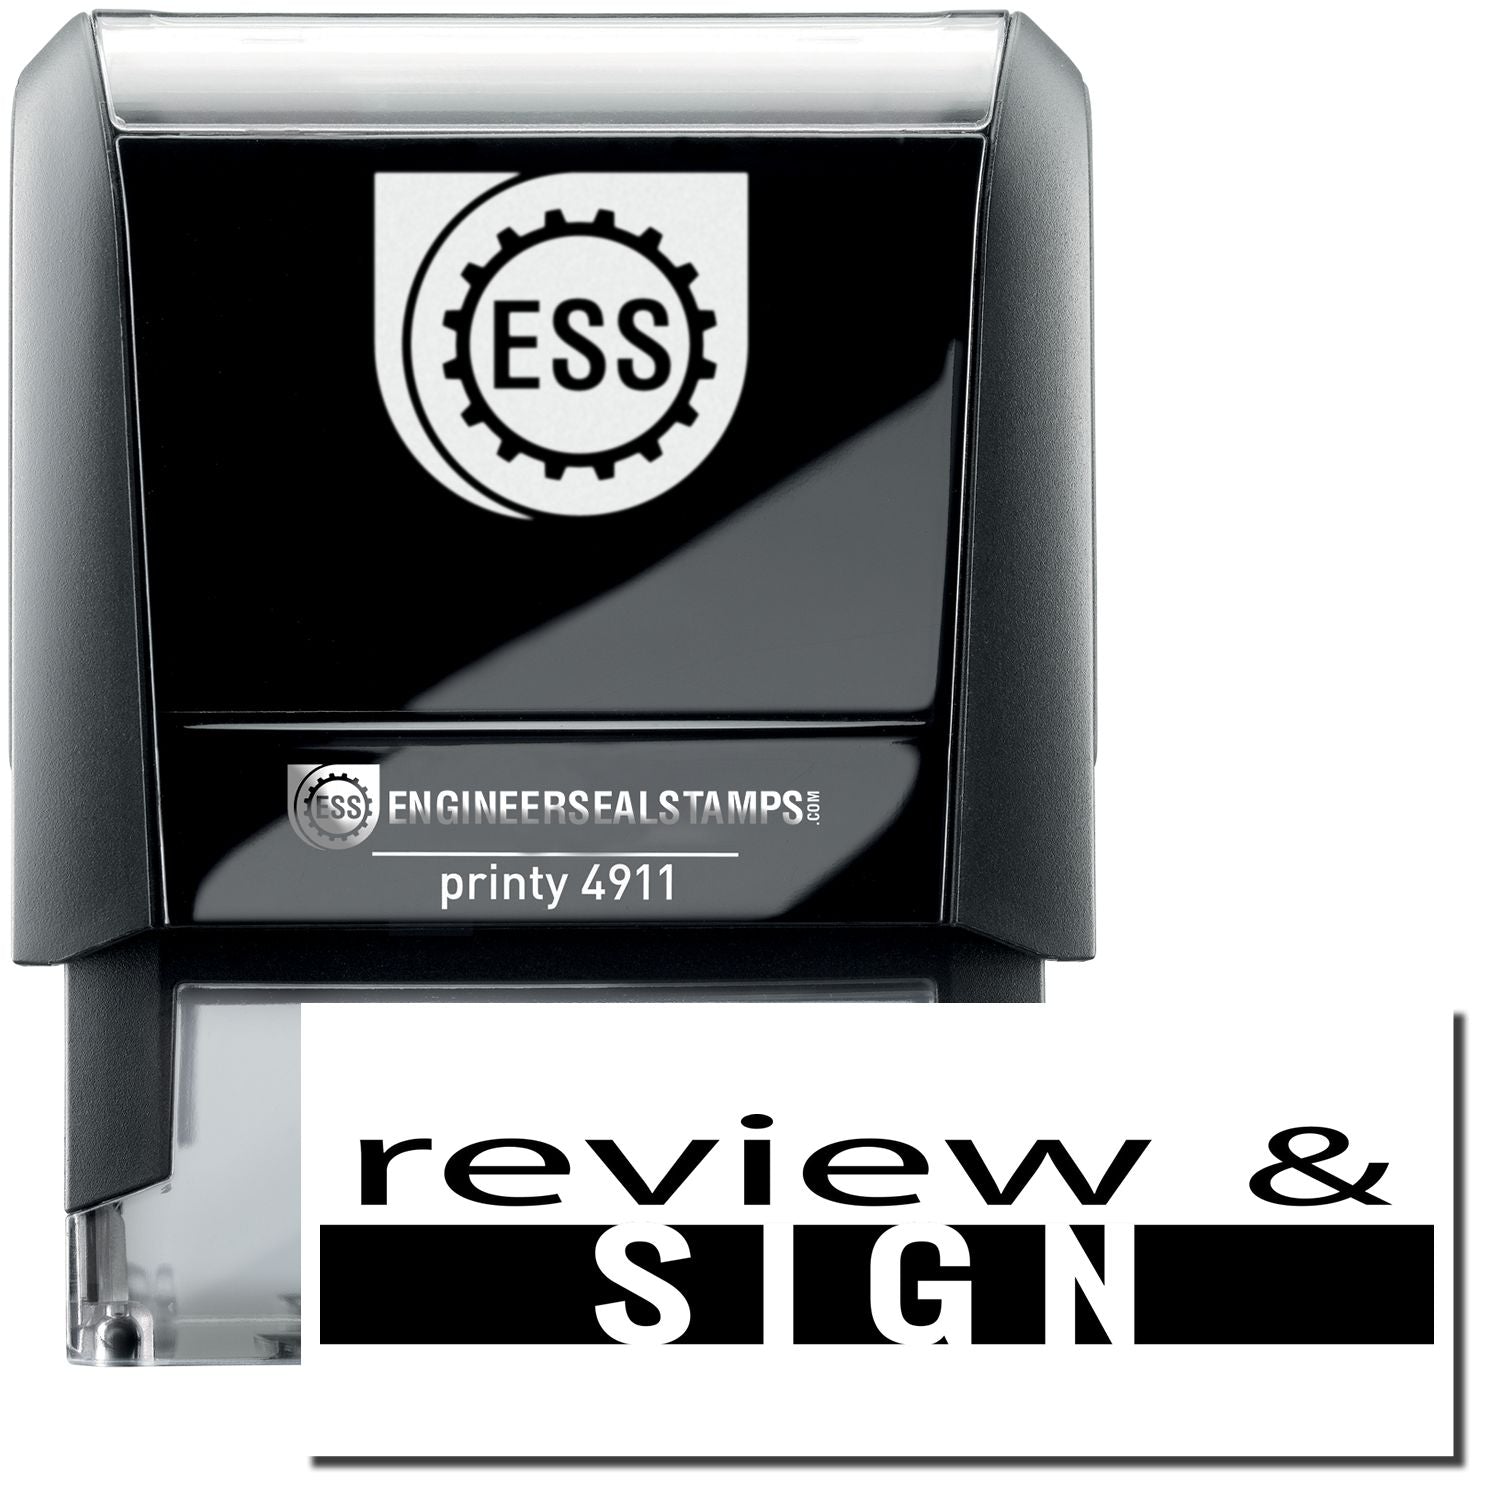 A self-inking stamp with a stamped image showing how the text "review & SIGN" in a bold font with a dual-colored marking is displayed after stamping.